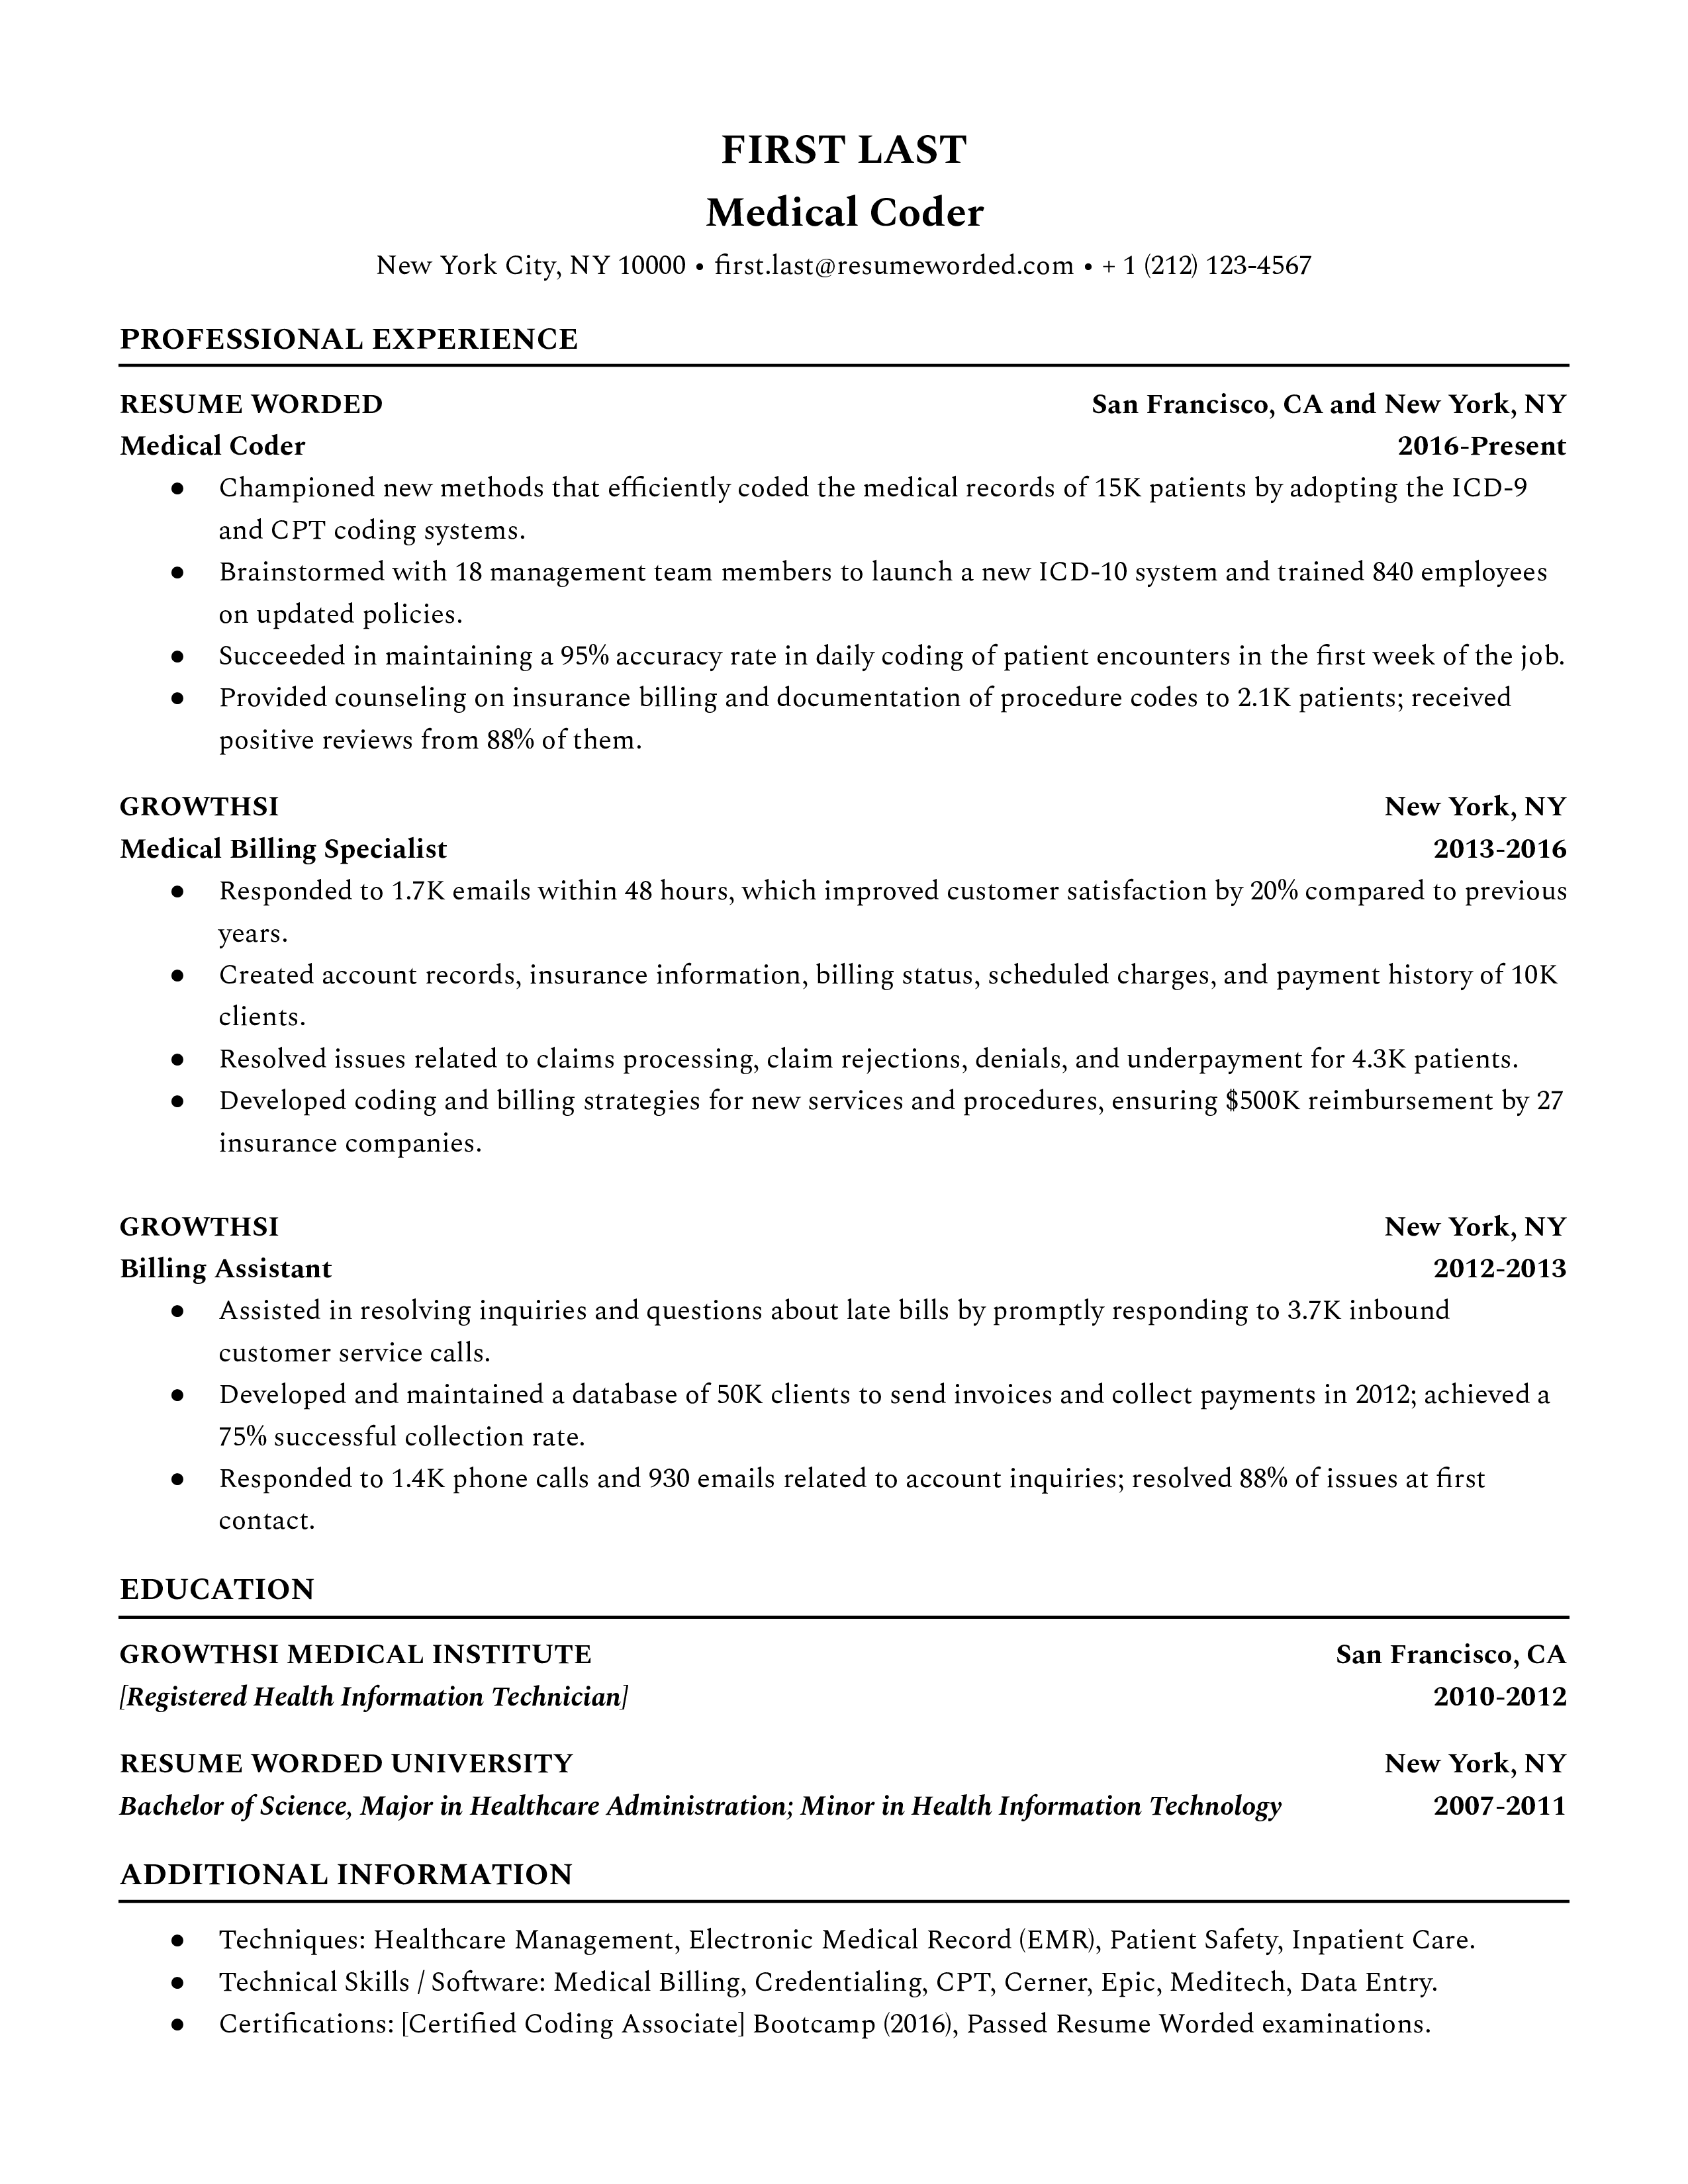 A resume for a medical coder with a BS in healthcare adminstration and experience as a billing assistant and medical billing specialist.